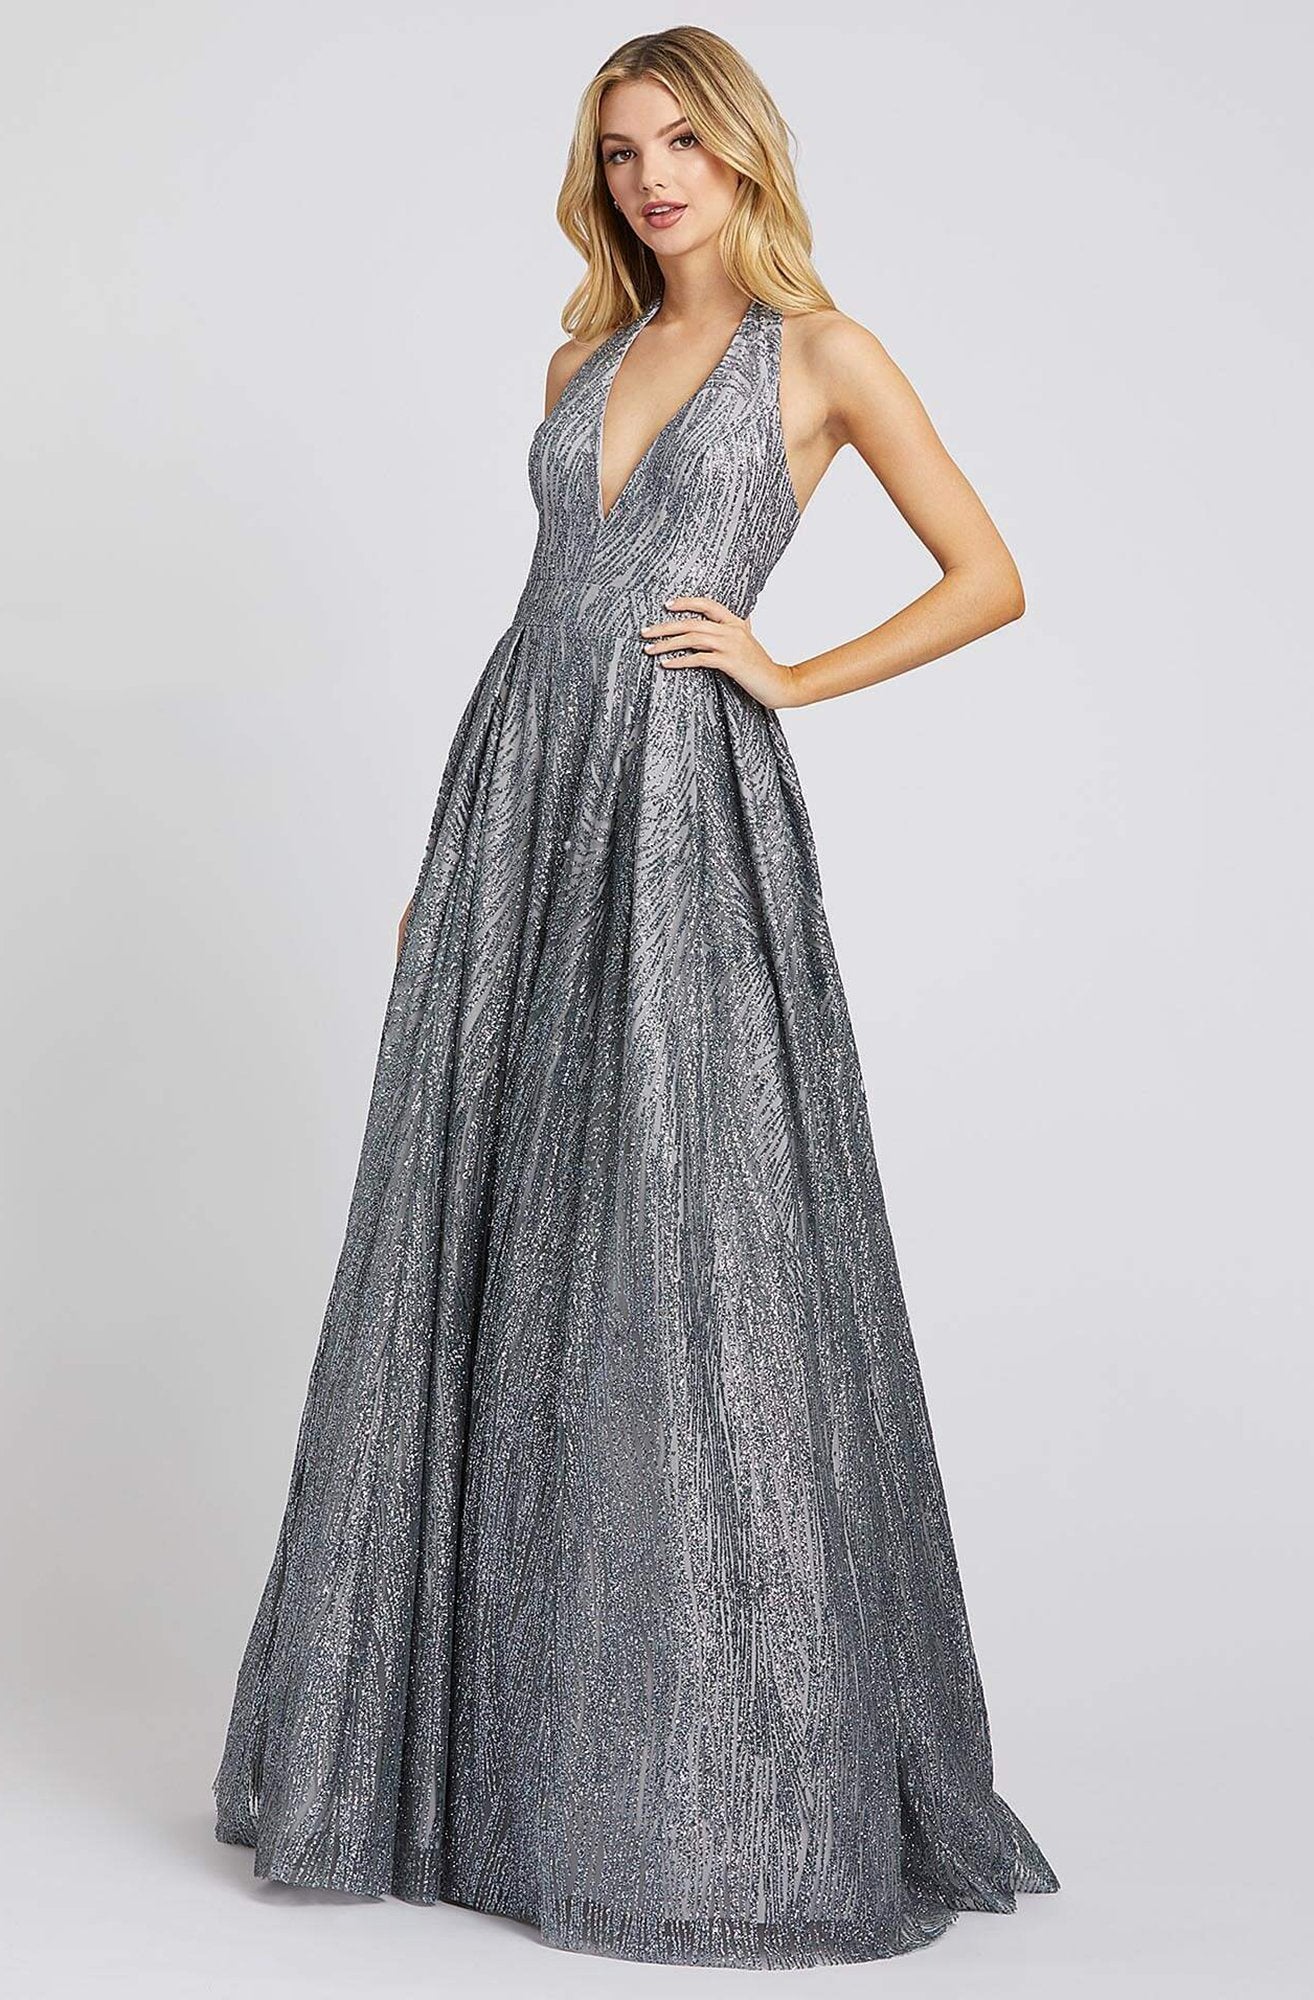 Ieena Duggal - 26228I Glitter Tulle Plunging Halter Long Gown In Silver and Gray